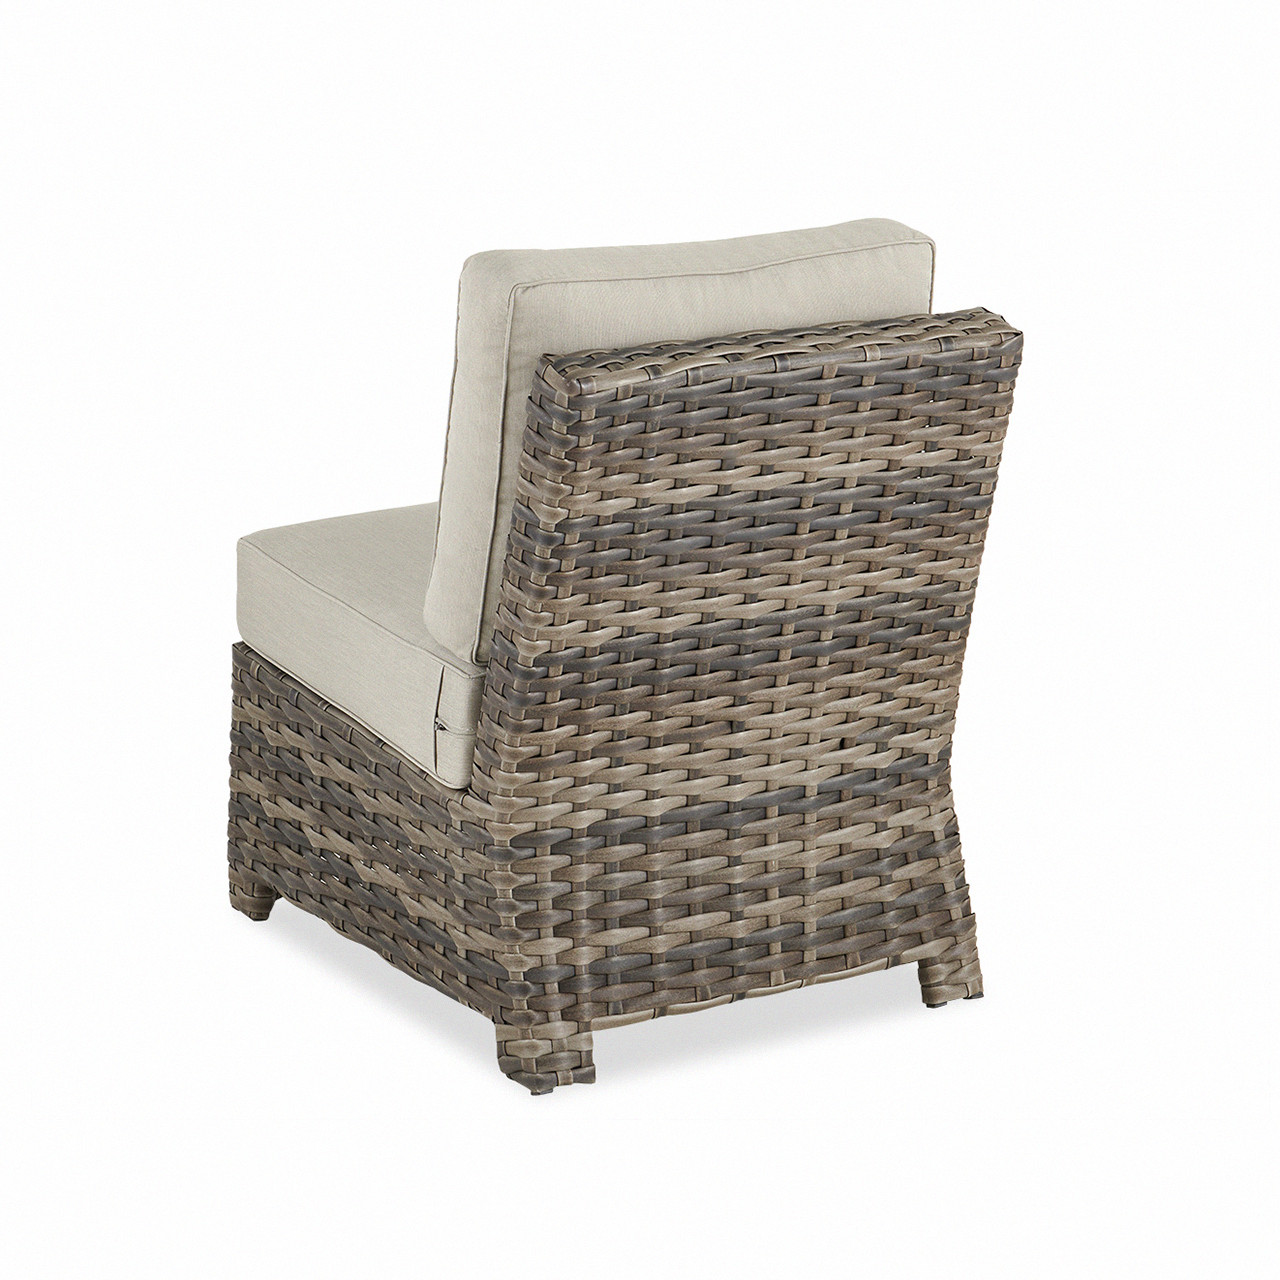 Contempo Husk Outdoor Wicker with Cushions Armless Club Chair